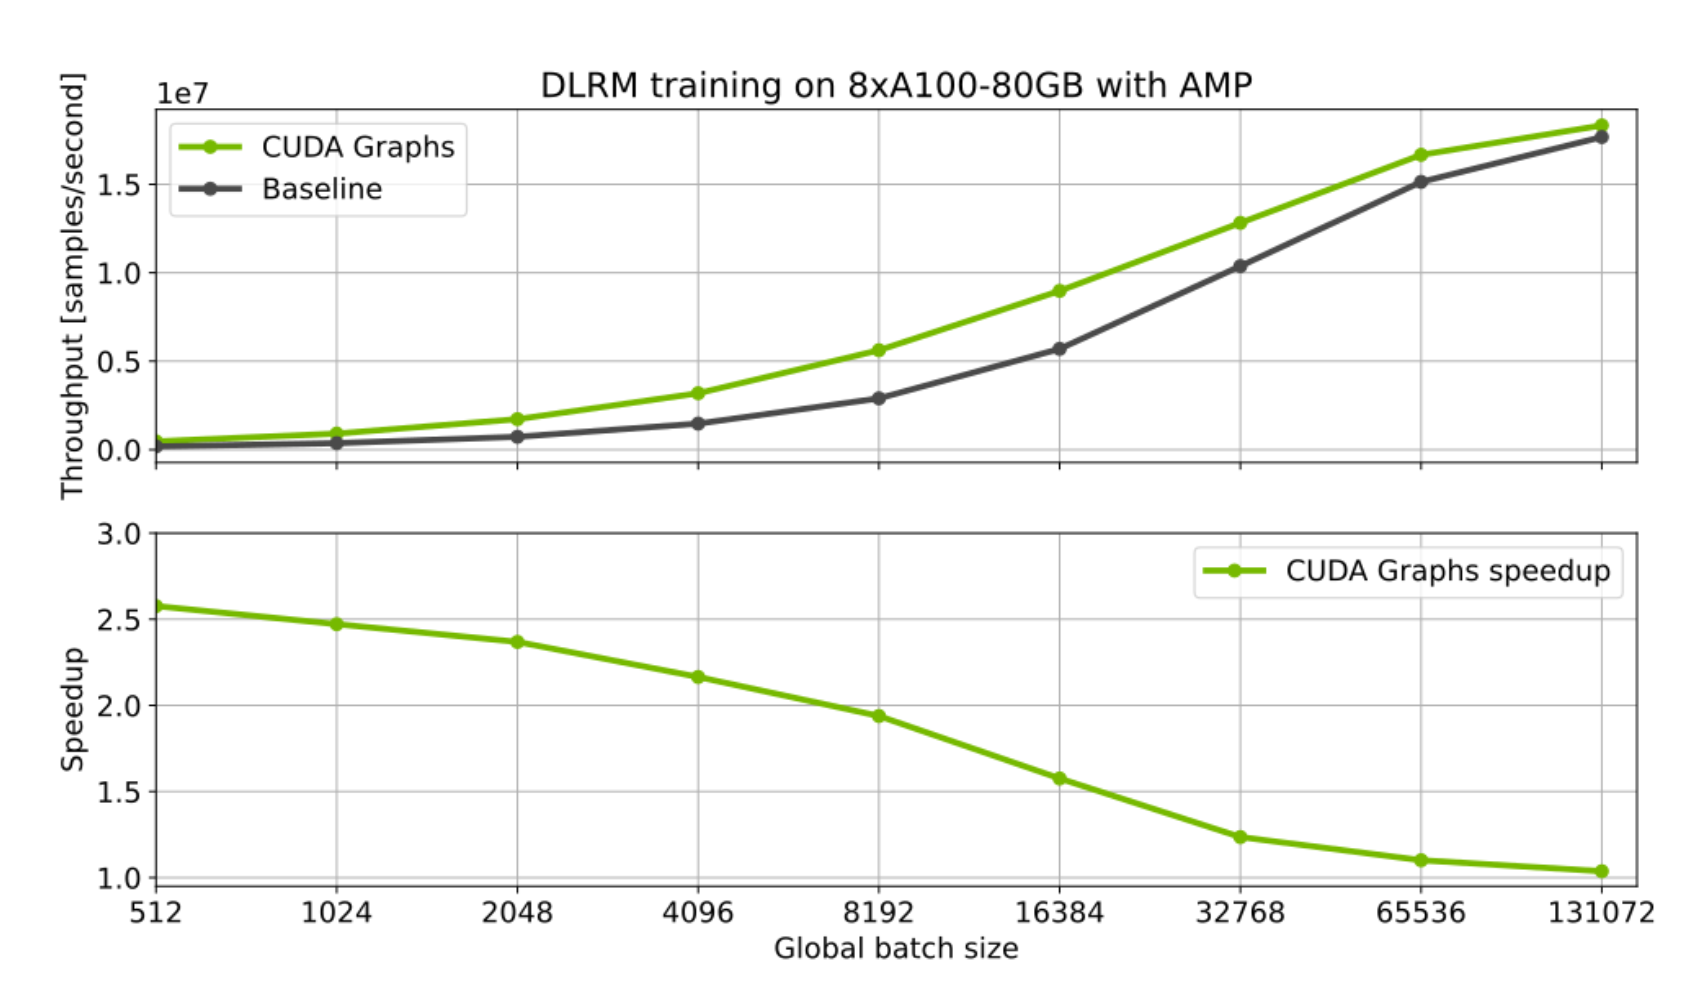 CUDA graphs optimization for the DLRM model. The impact is larger for smaller batch sizes where CPU overheads are more pronounced.